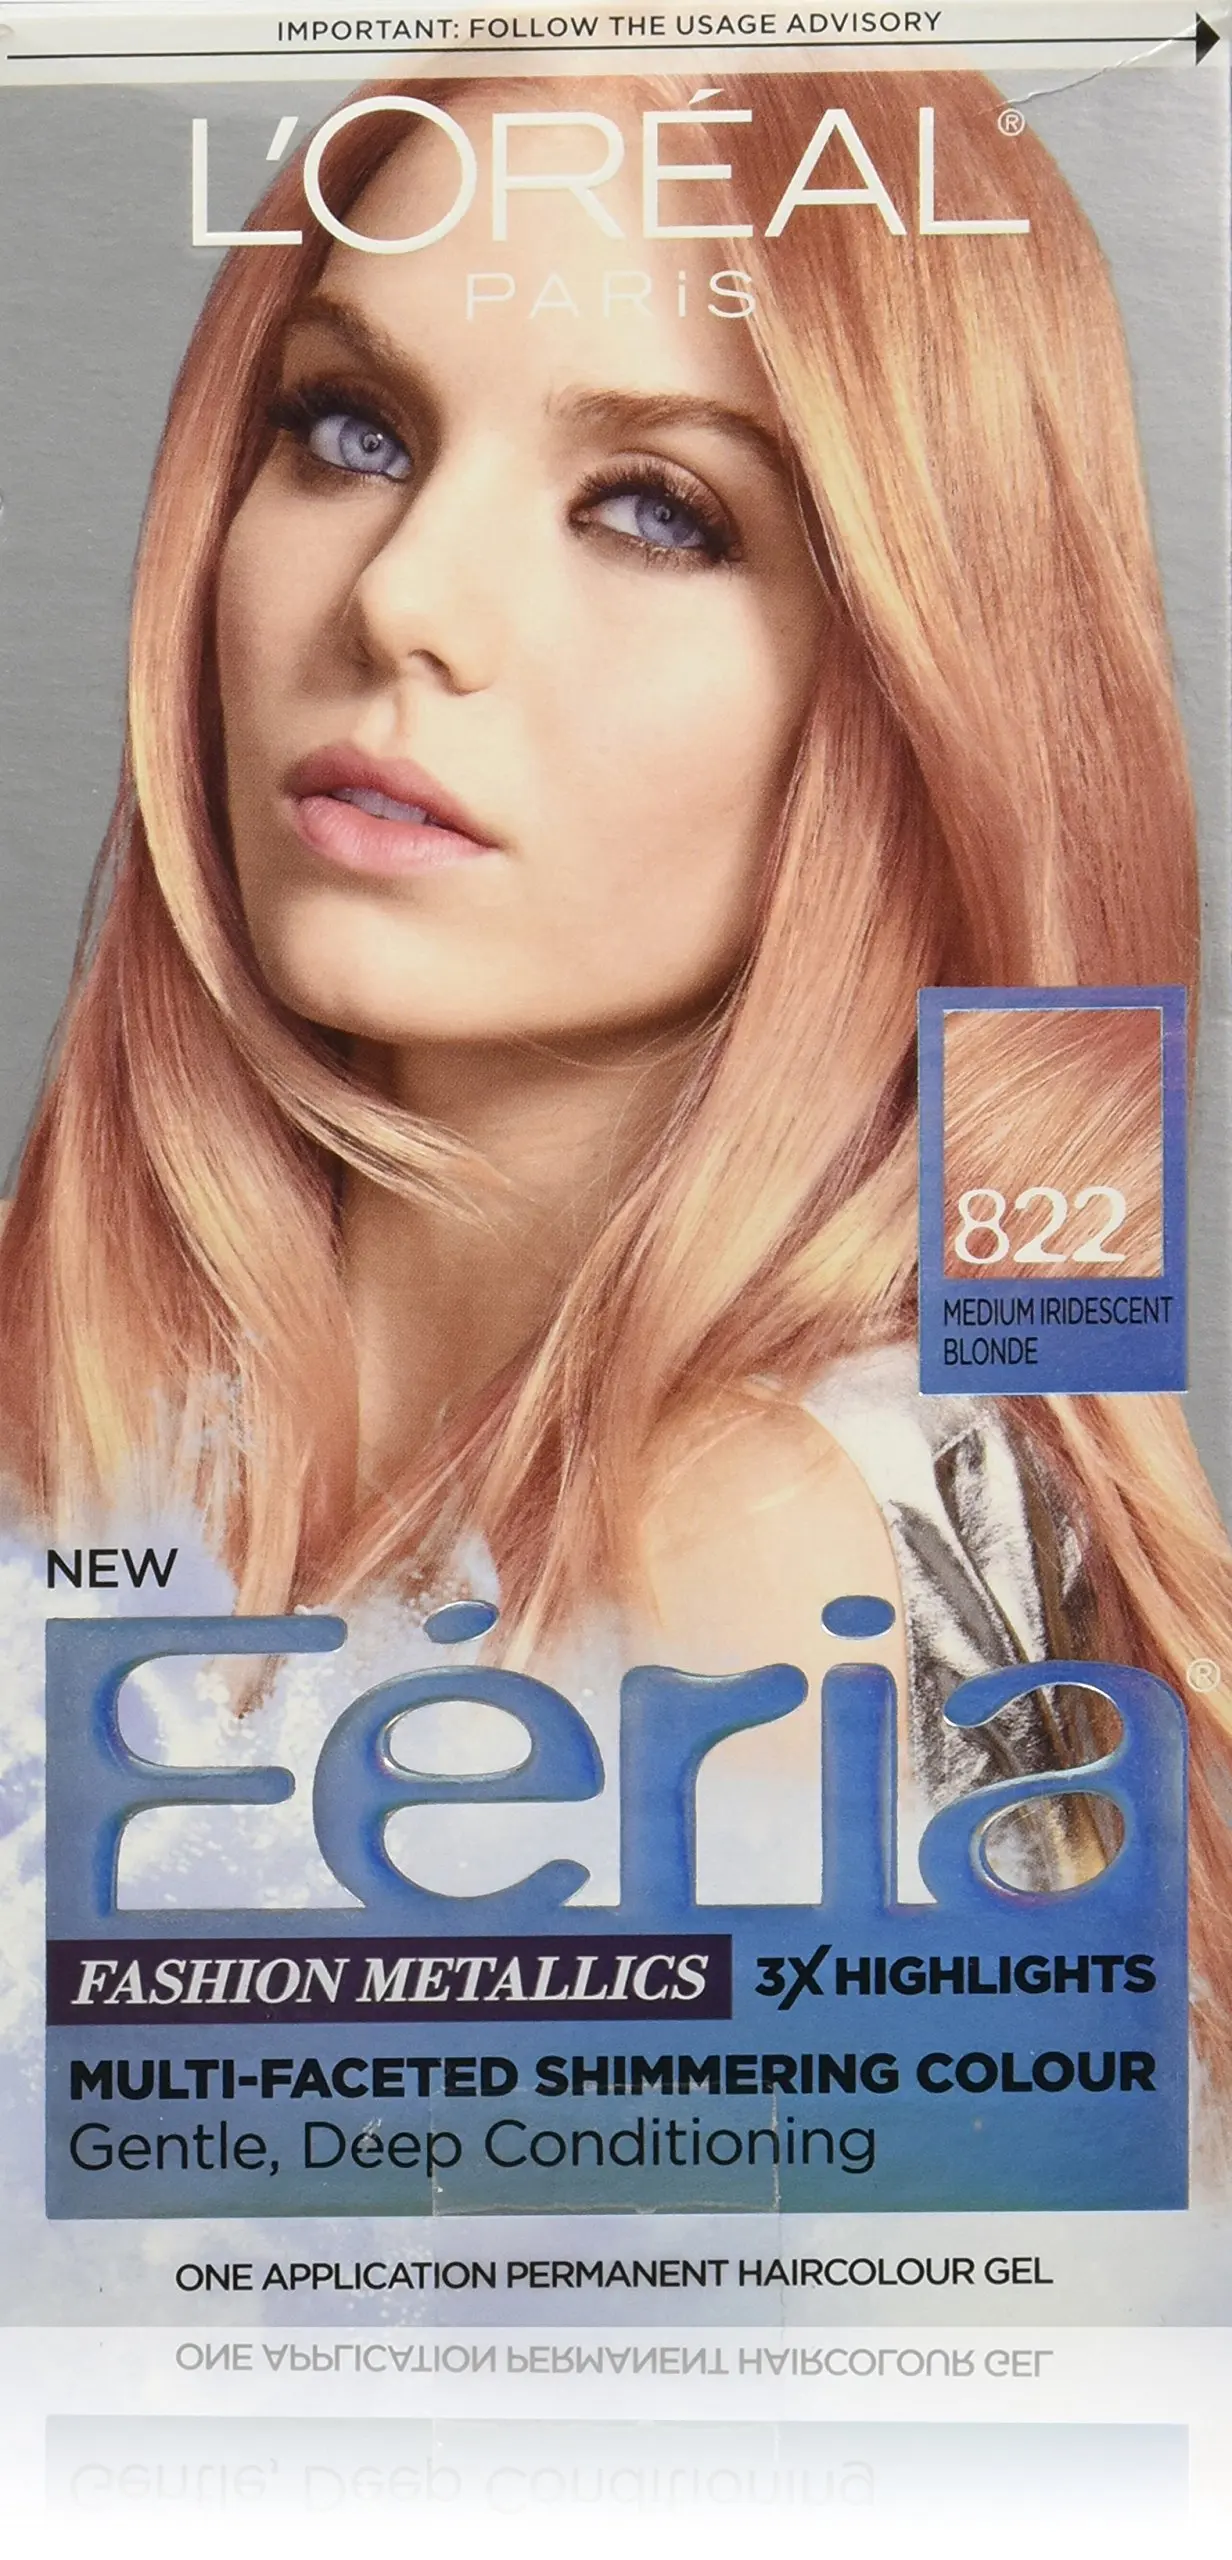 Cheap Loreal Feria Hair Color Chart, find Loreal Feria Hair Color Chart